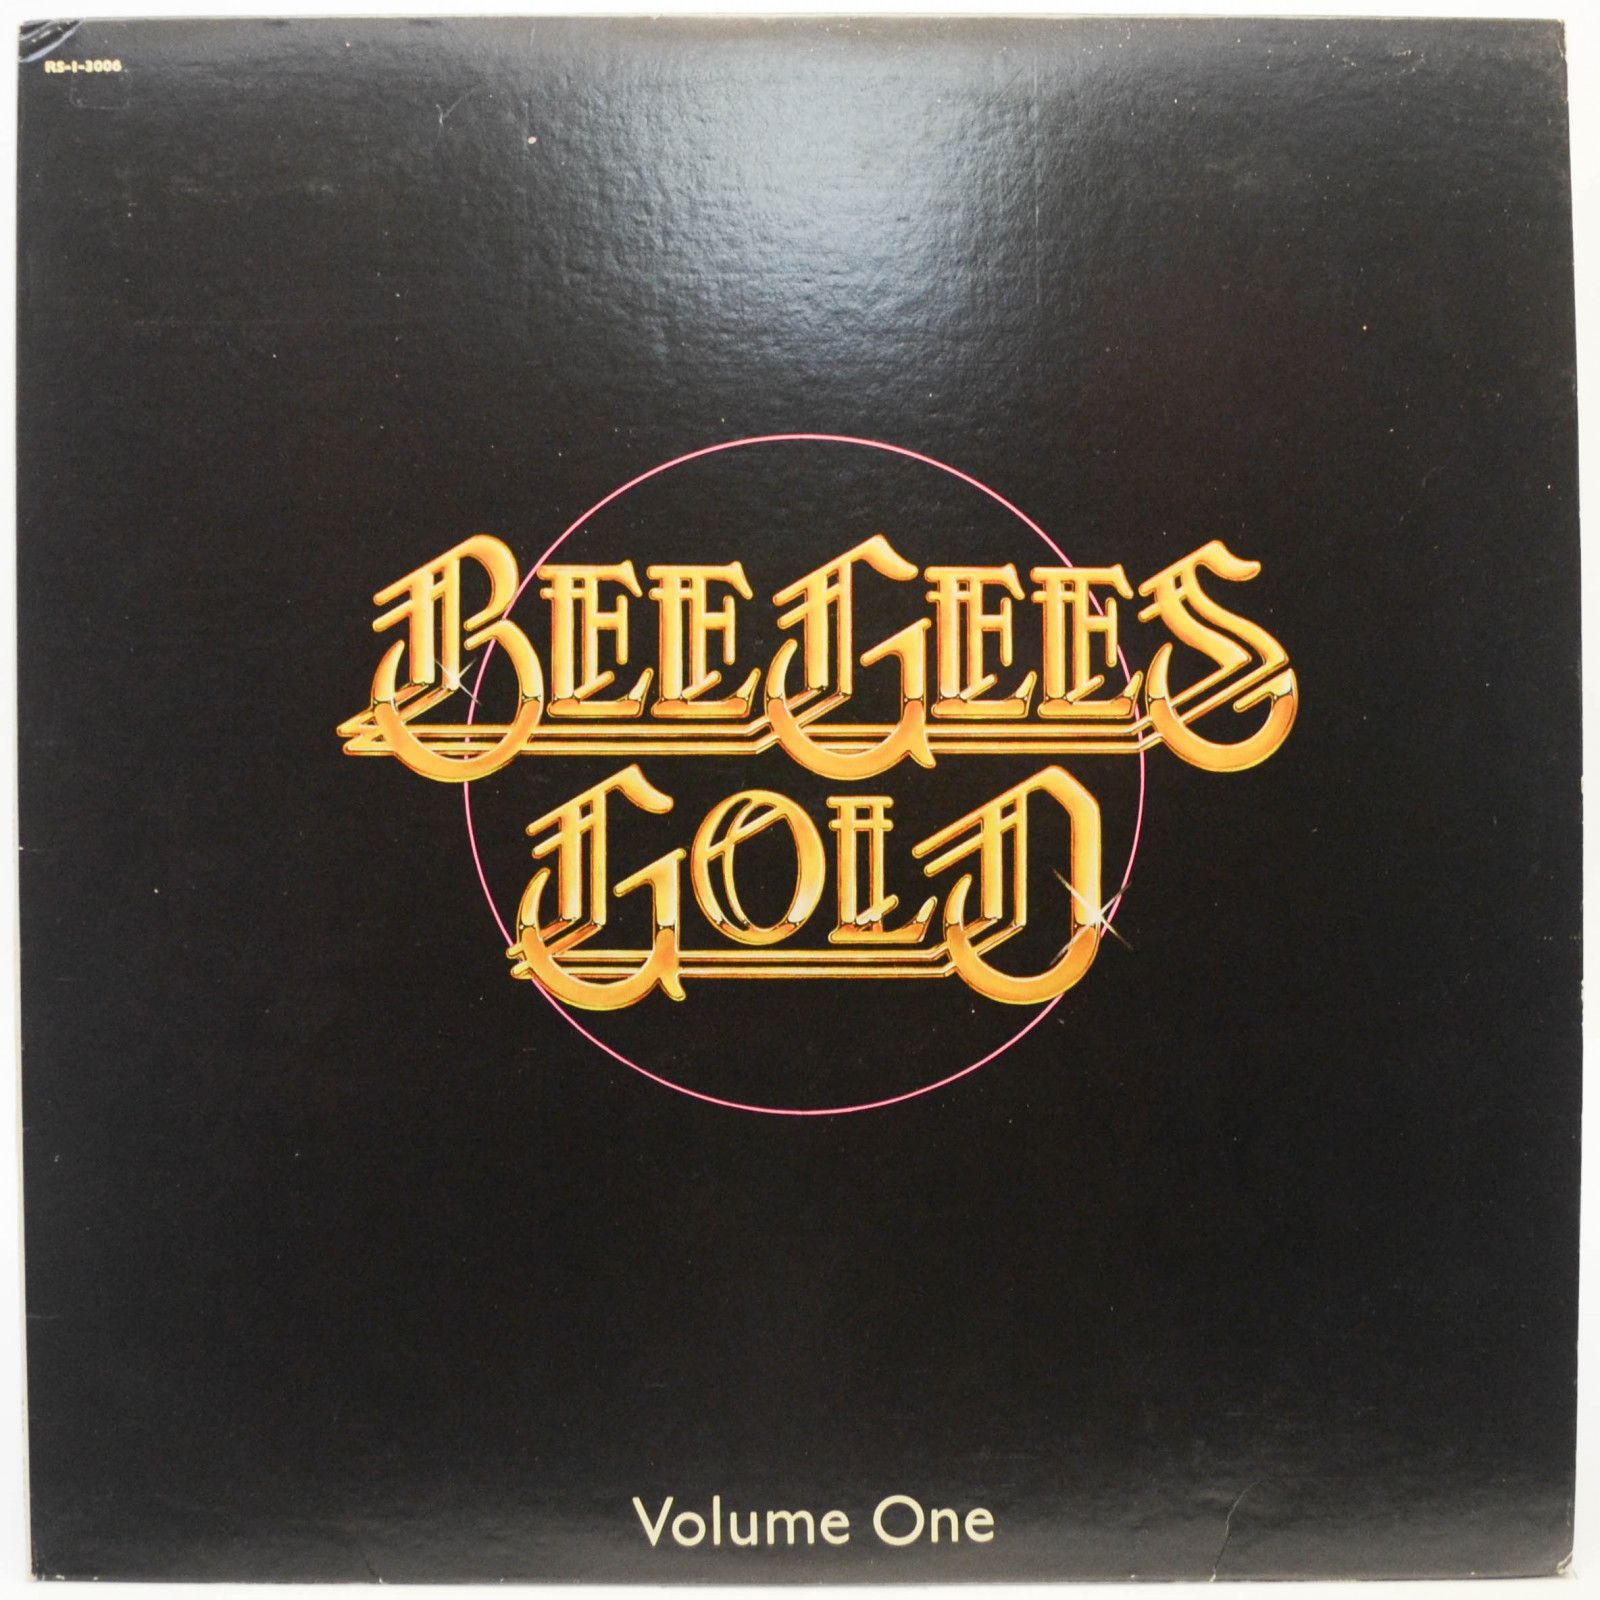 Bee Gees — Gold Volume 1 (USA), 1978